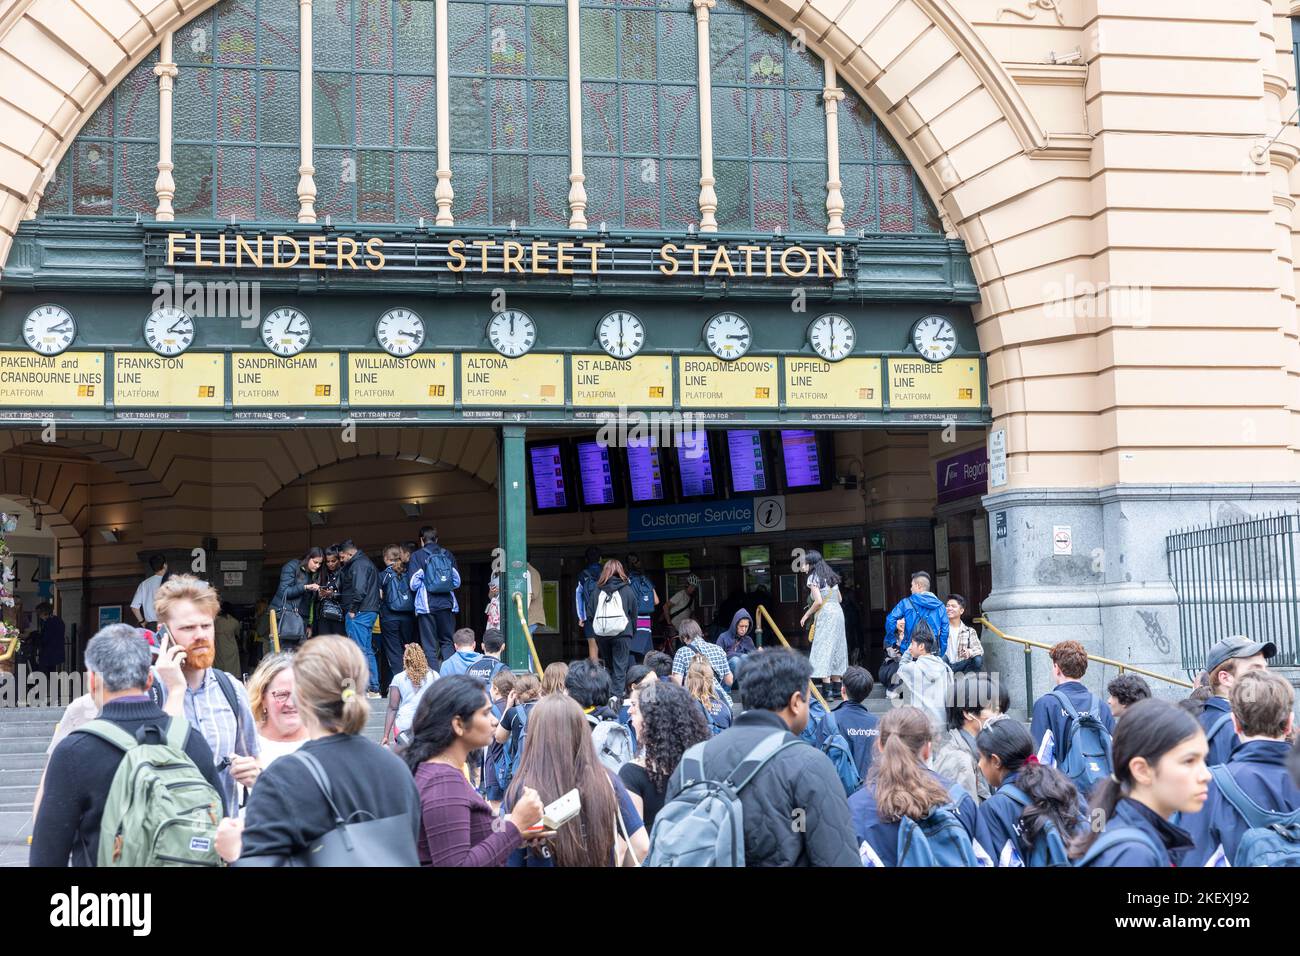 Flinders street station in Melbourne city centre, commuters include student school group in uniform,Melbourne,Victoria,Australia Stock Photo